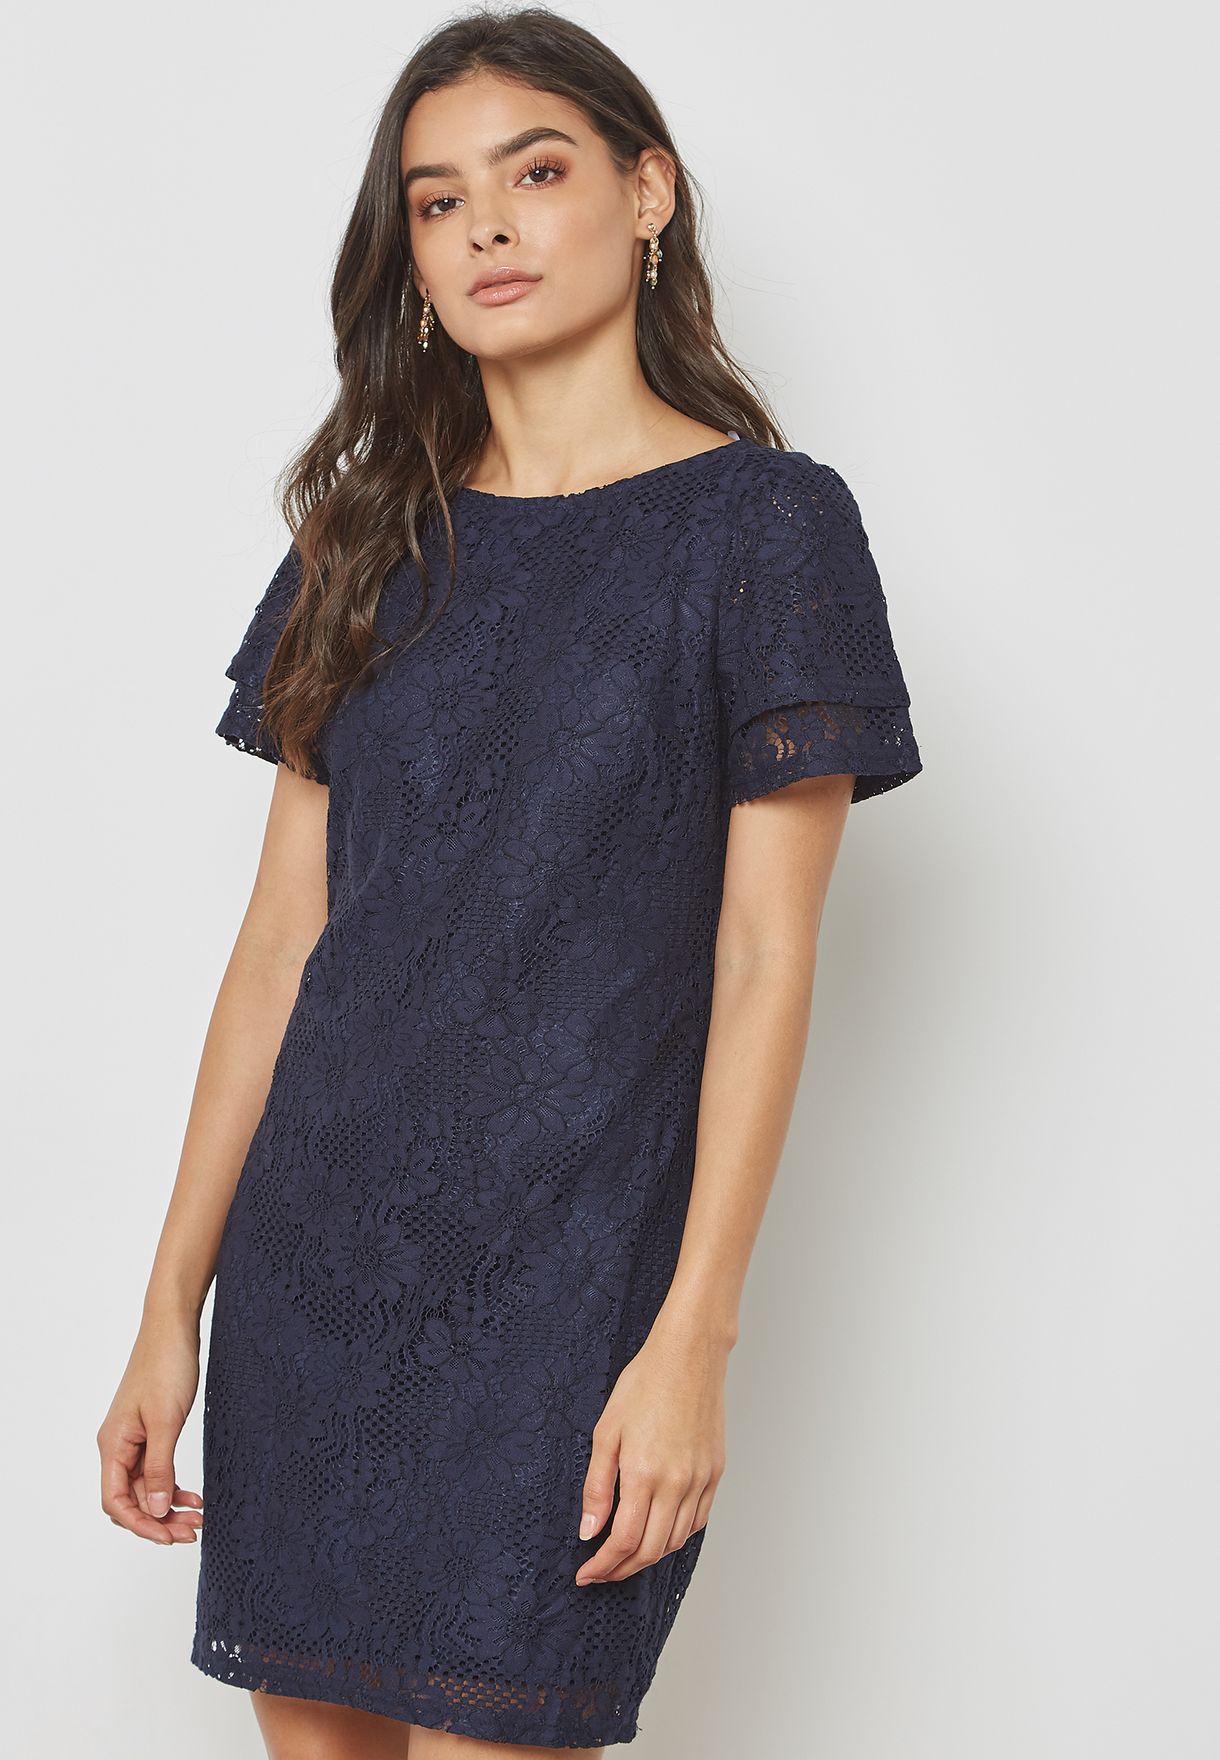 Buy > dorothy perkins navy lace dress > in stock